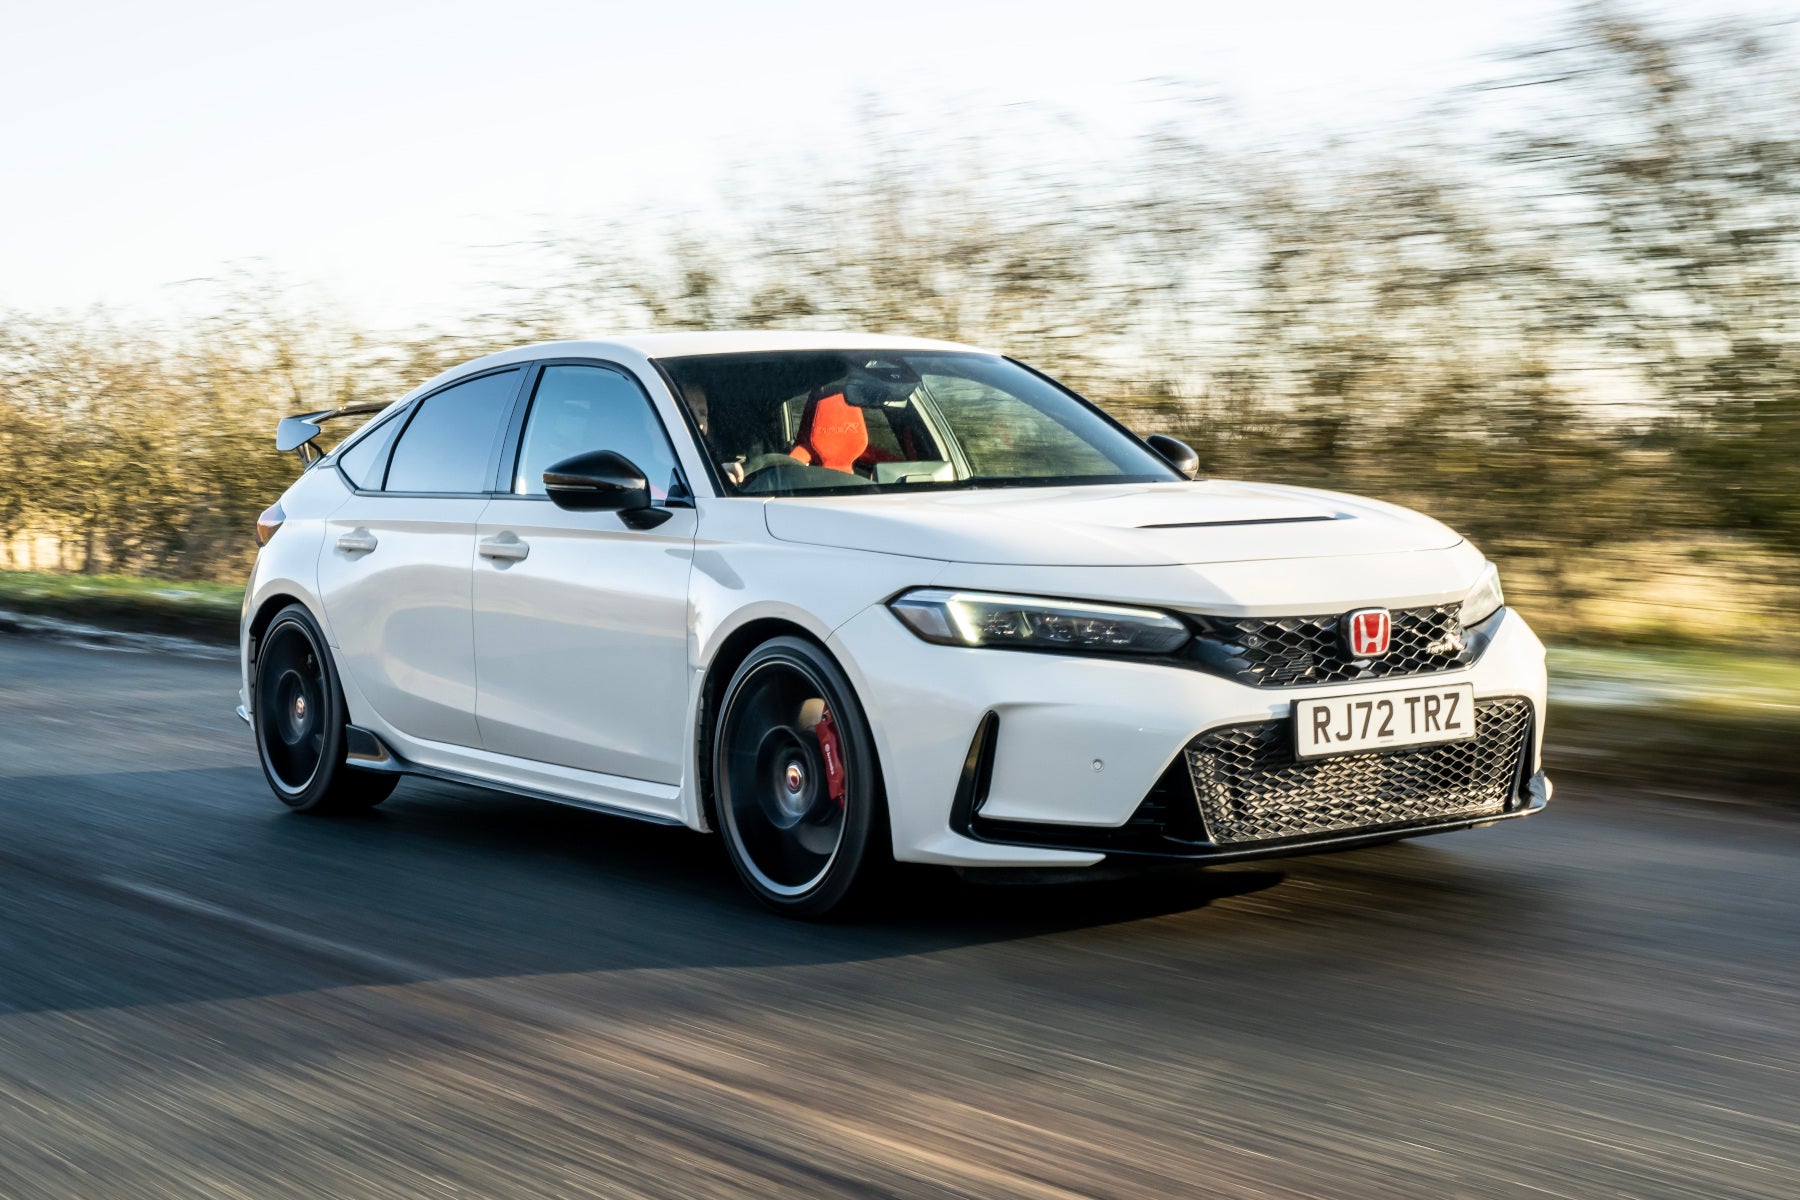 2023 Honda Civic Type R Review, Pricing, and Specs